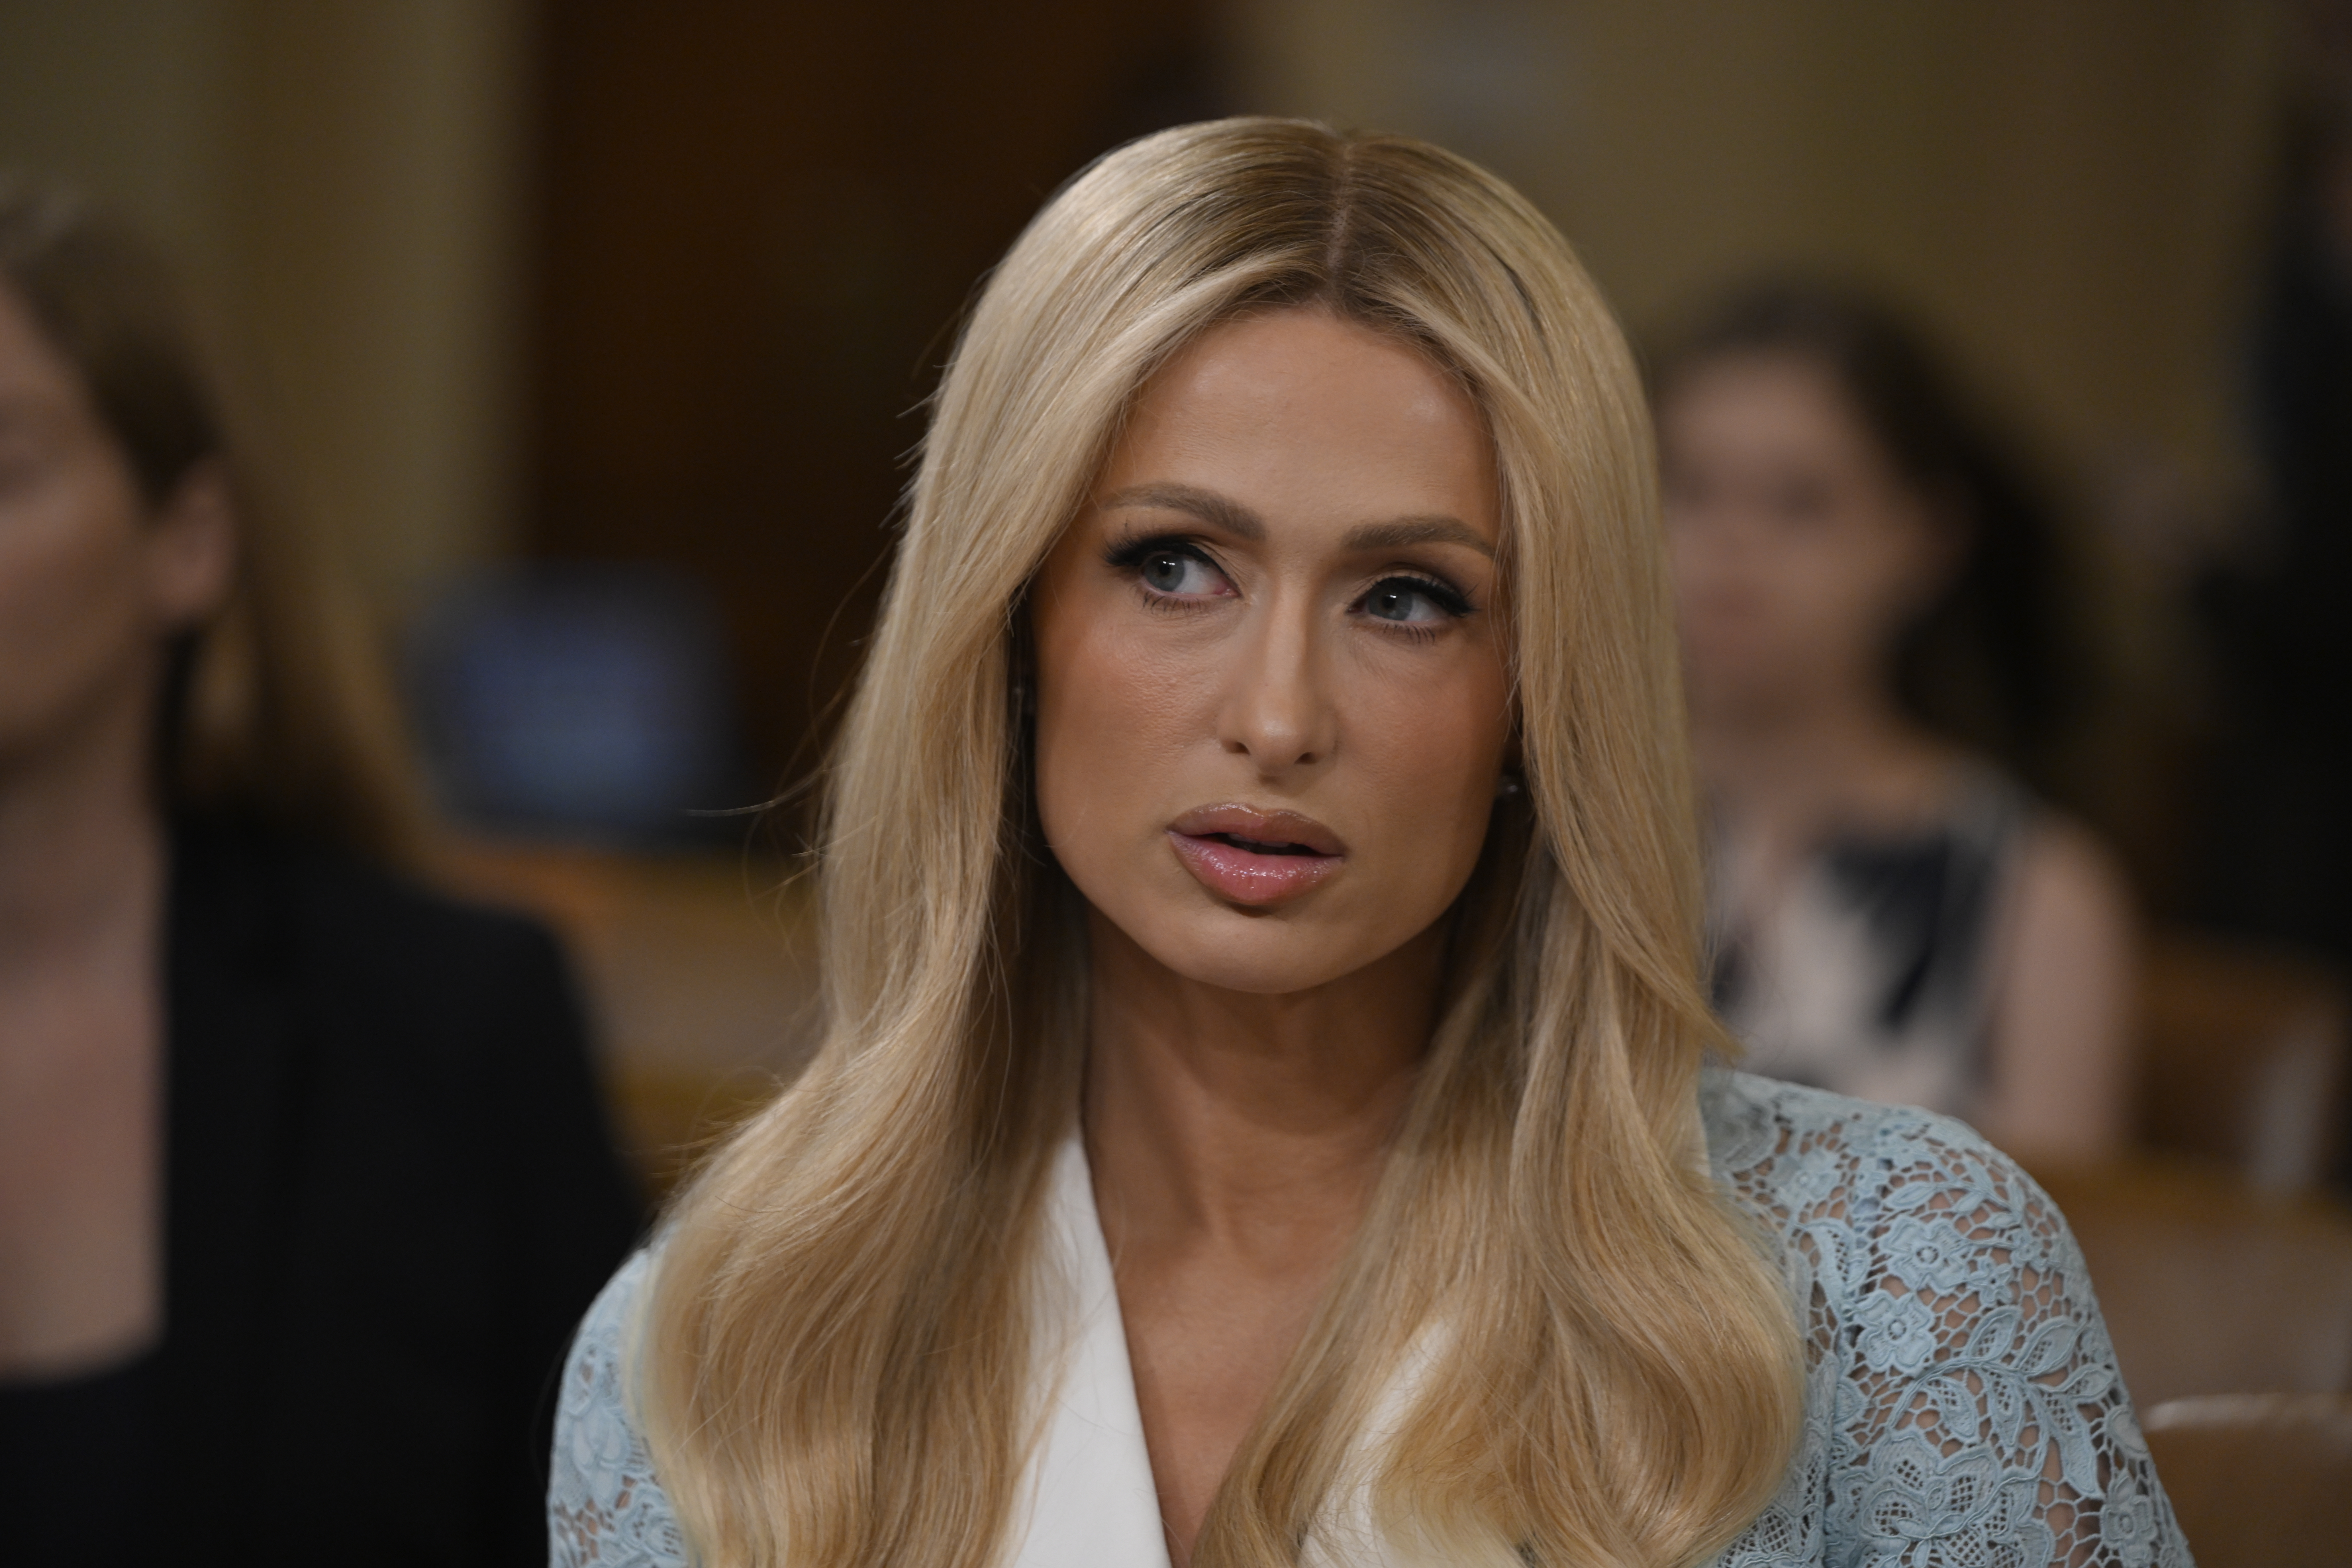 Paris Hilton testified in front of Congress on Wednesday about her experiences in a youth facility